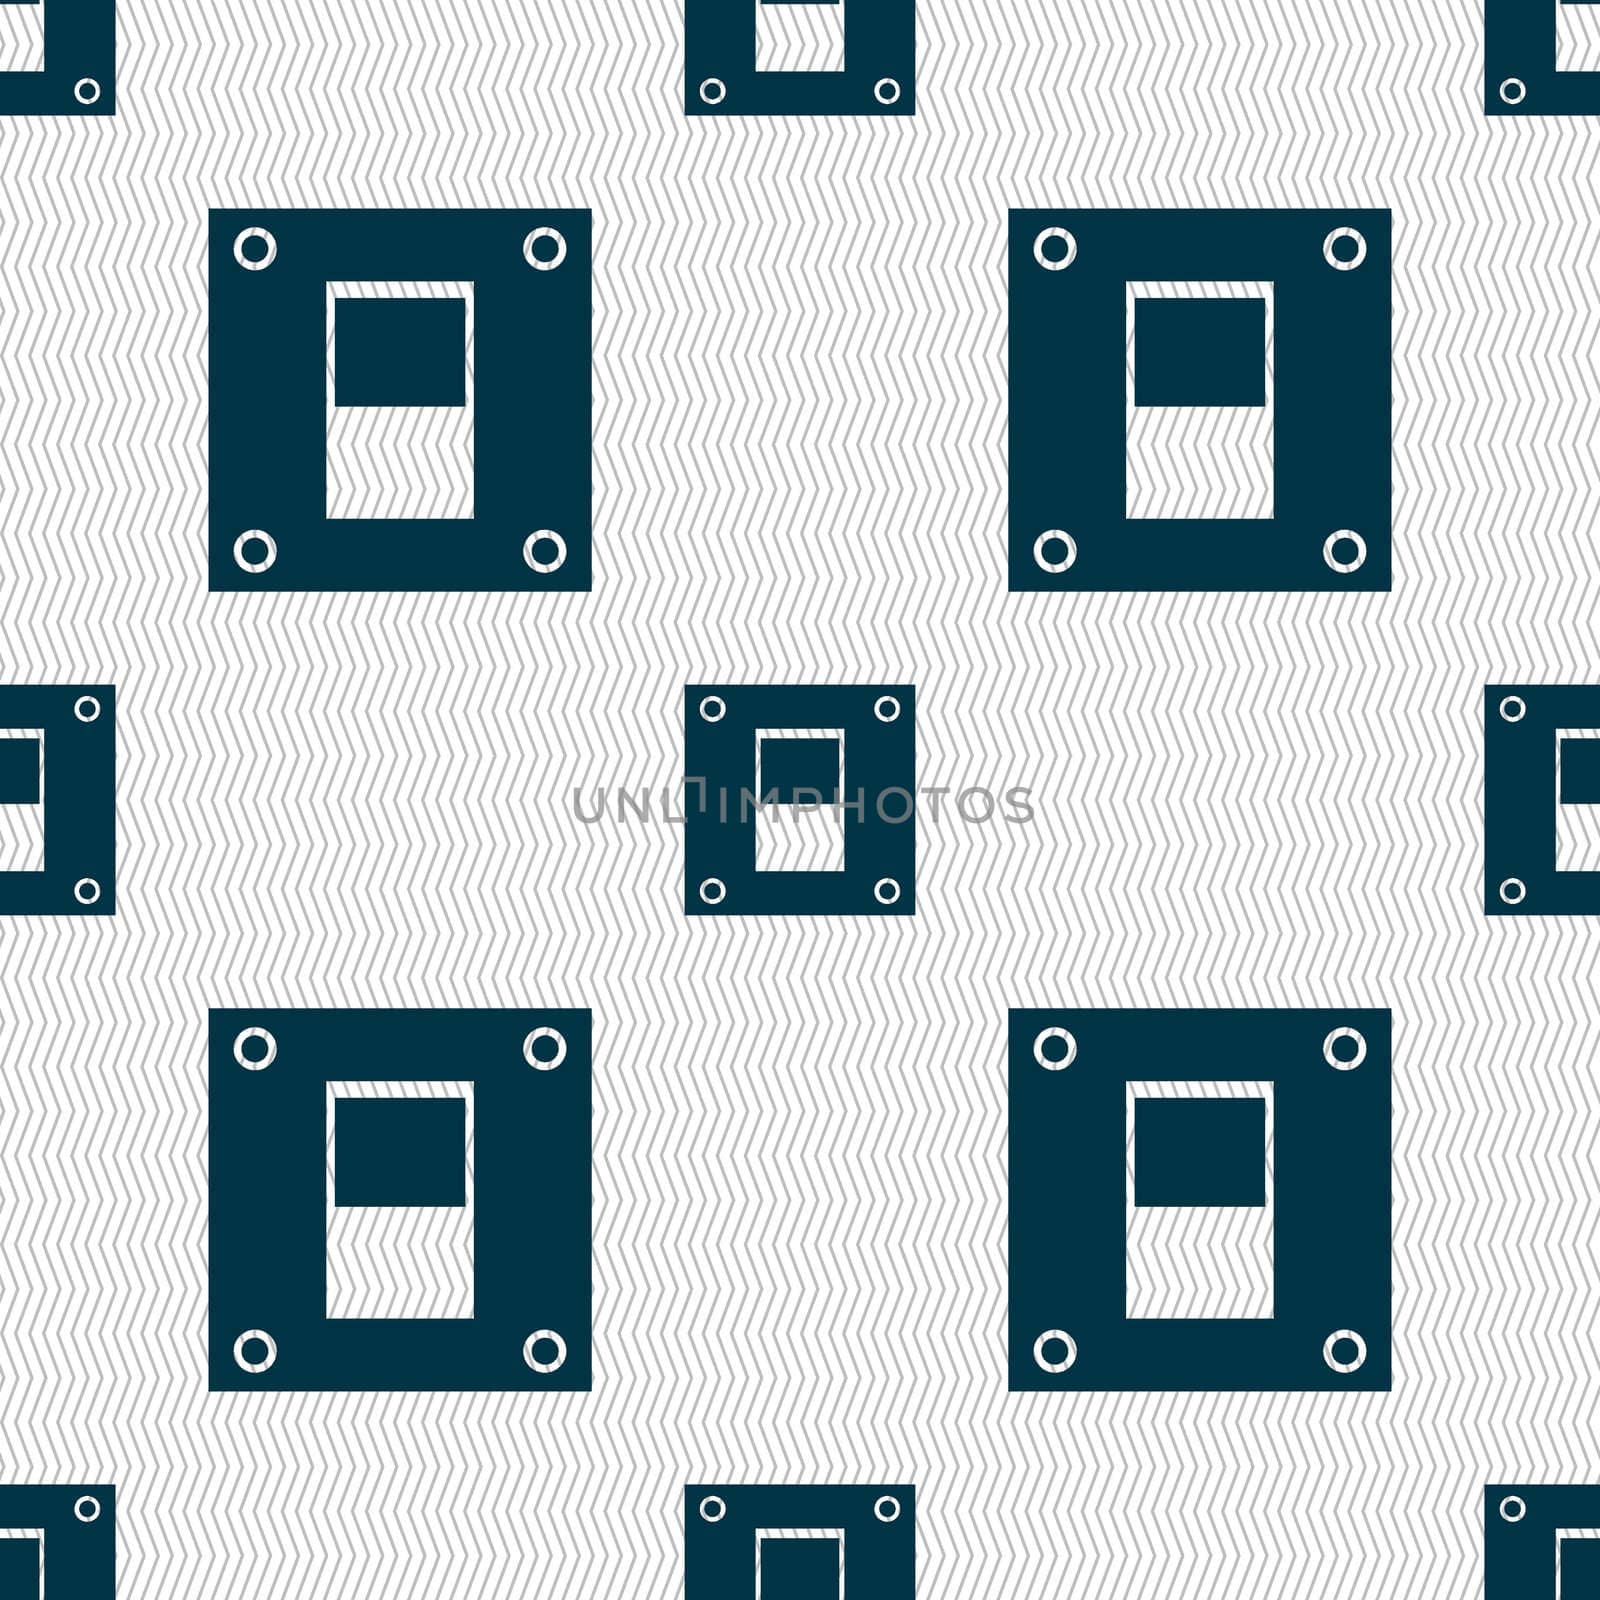 Power switch icon sign. Seamless abstract background with geometric shapes. illustration